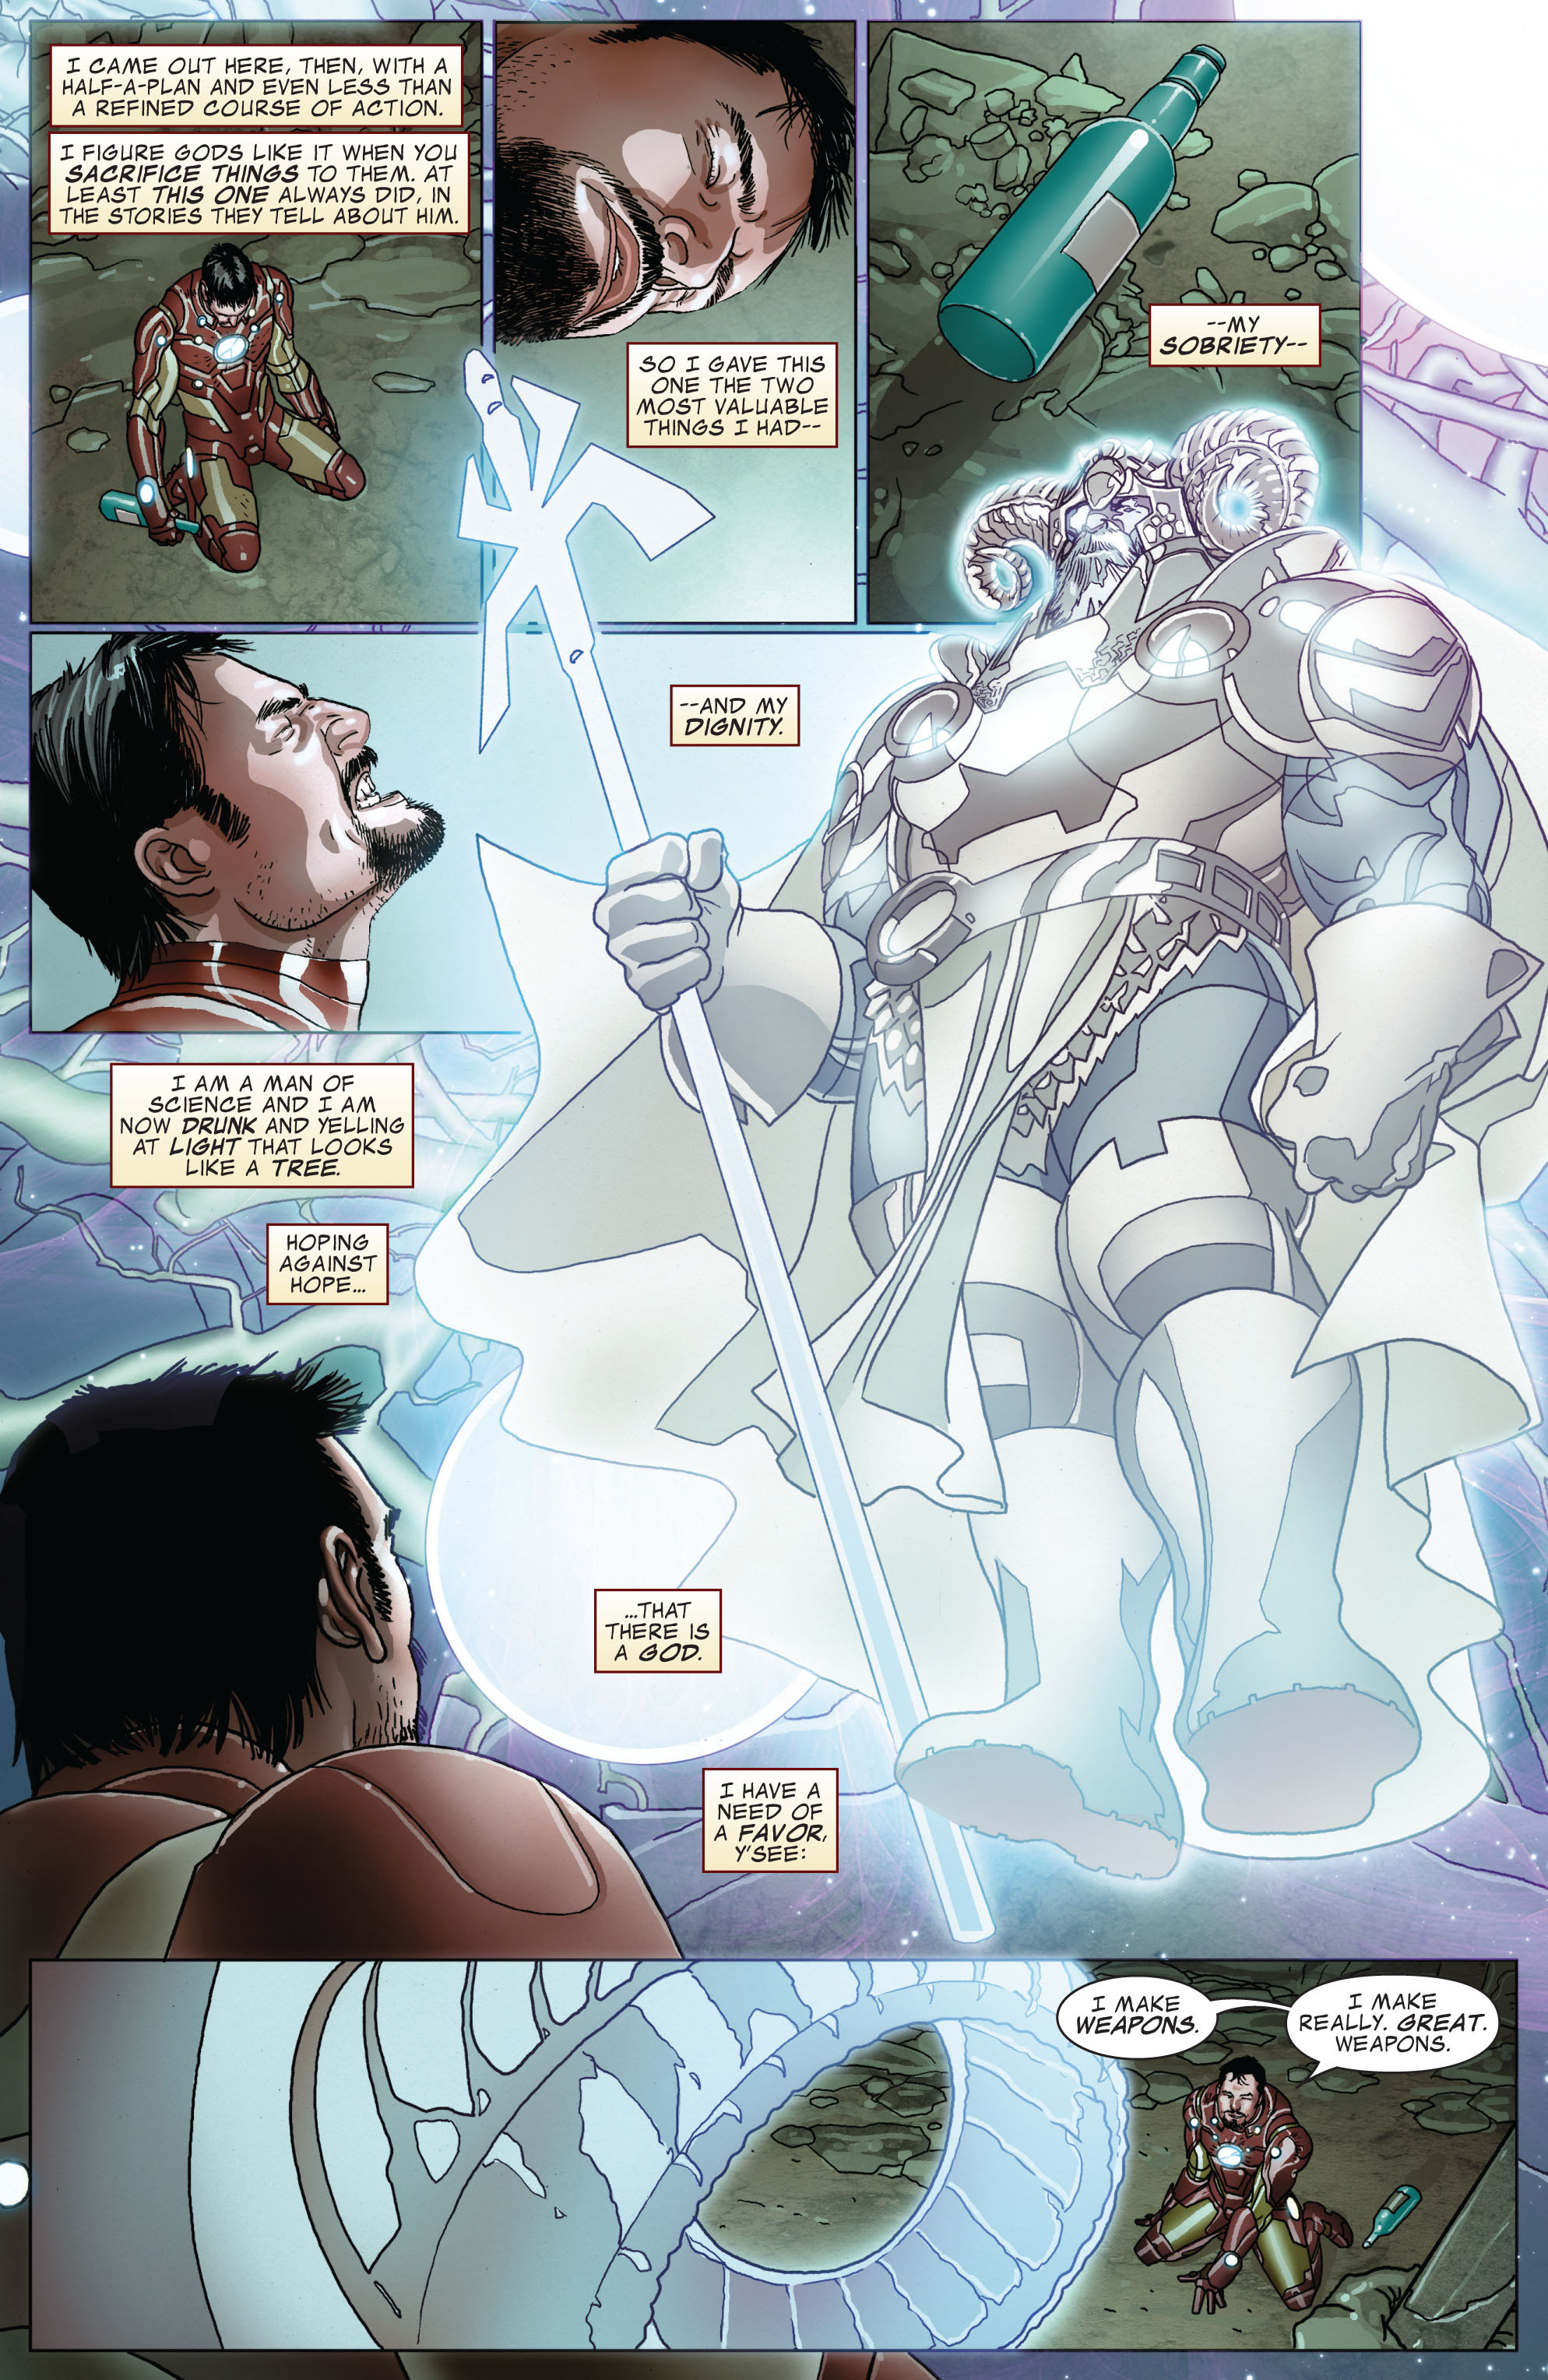 Invincible Iron Man (2008) 506 Page 3